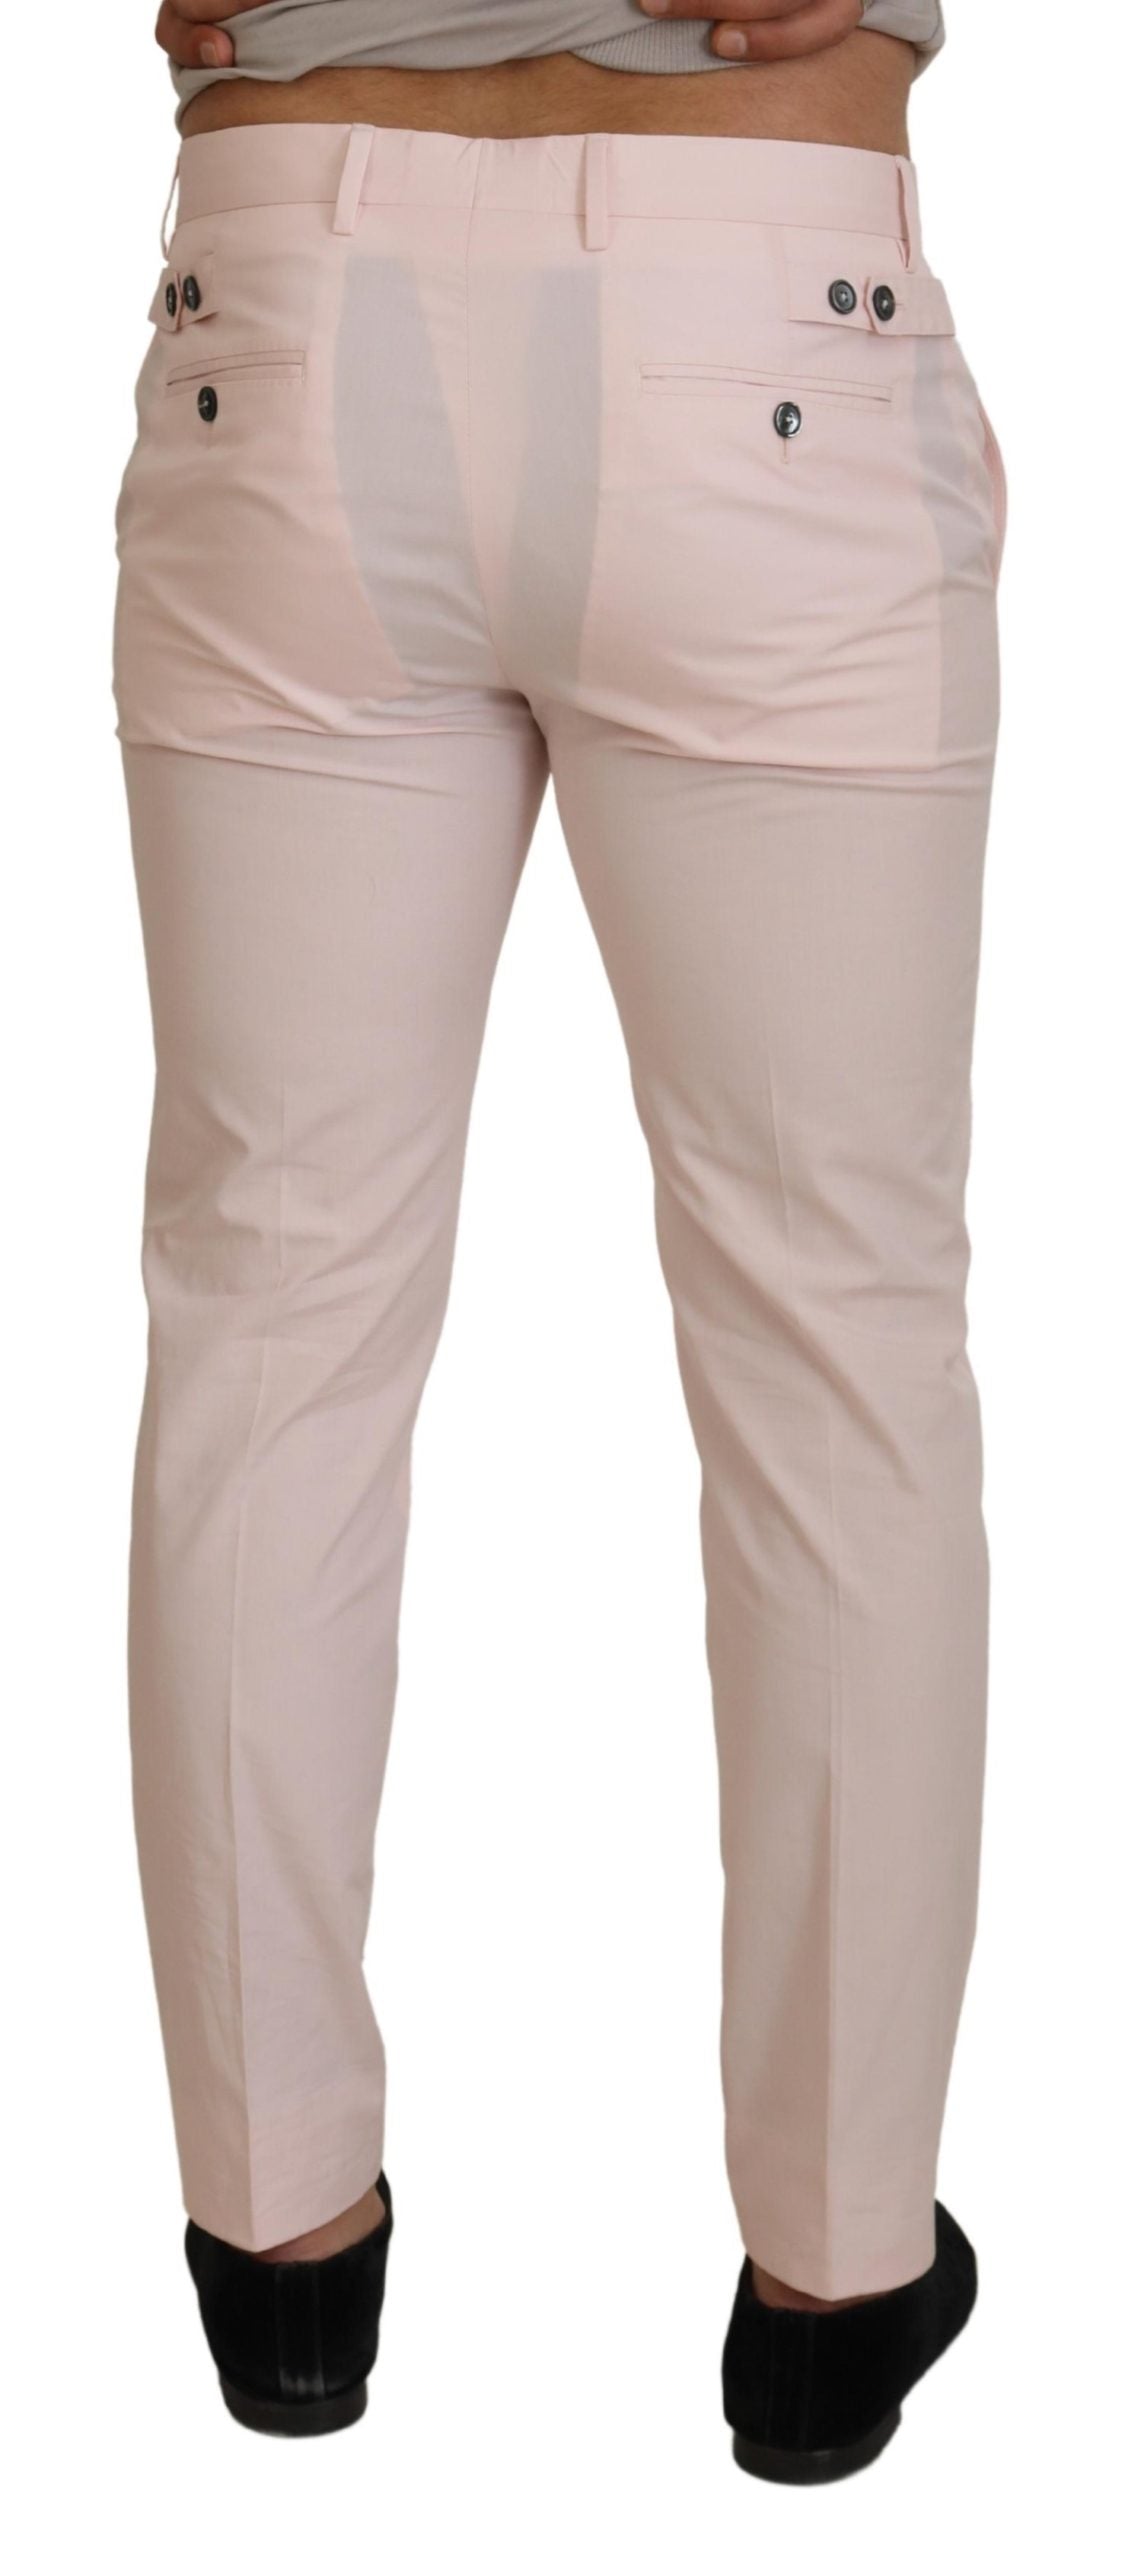 Elegant Pink Chino Pants - Perfect Stretch Fit